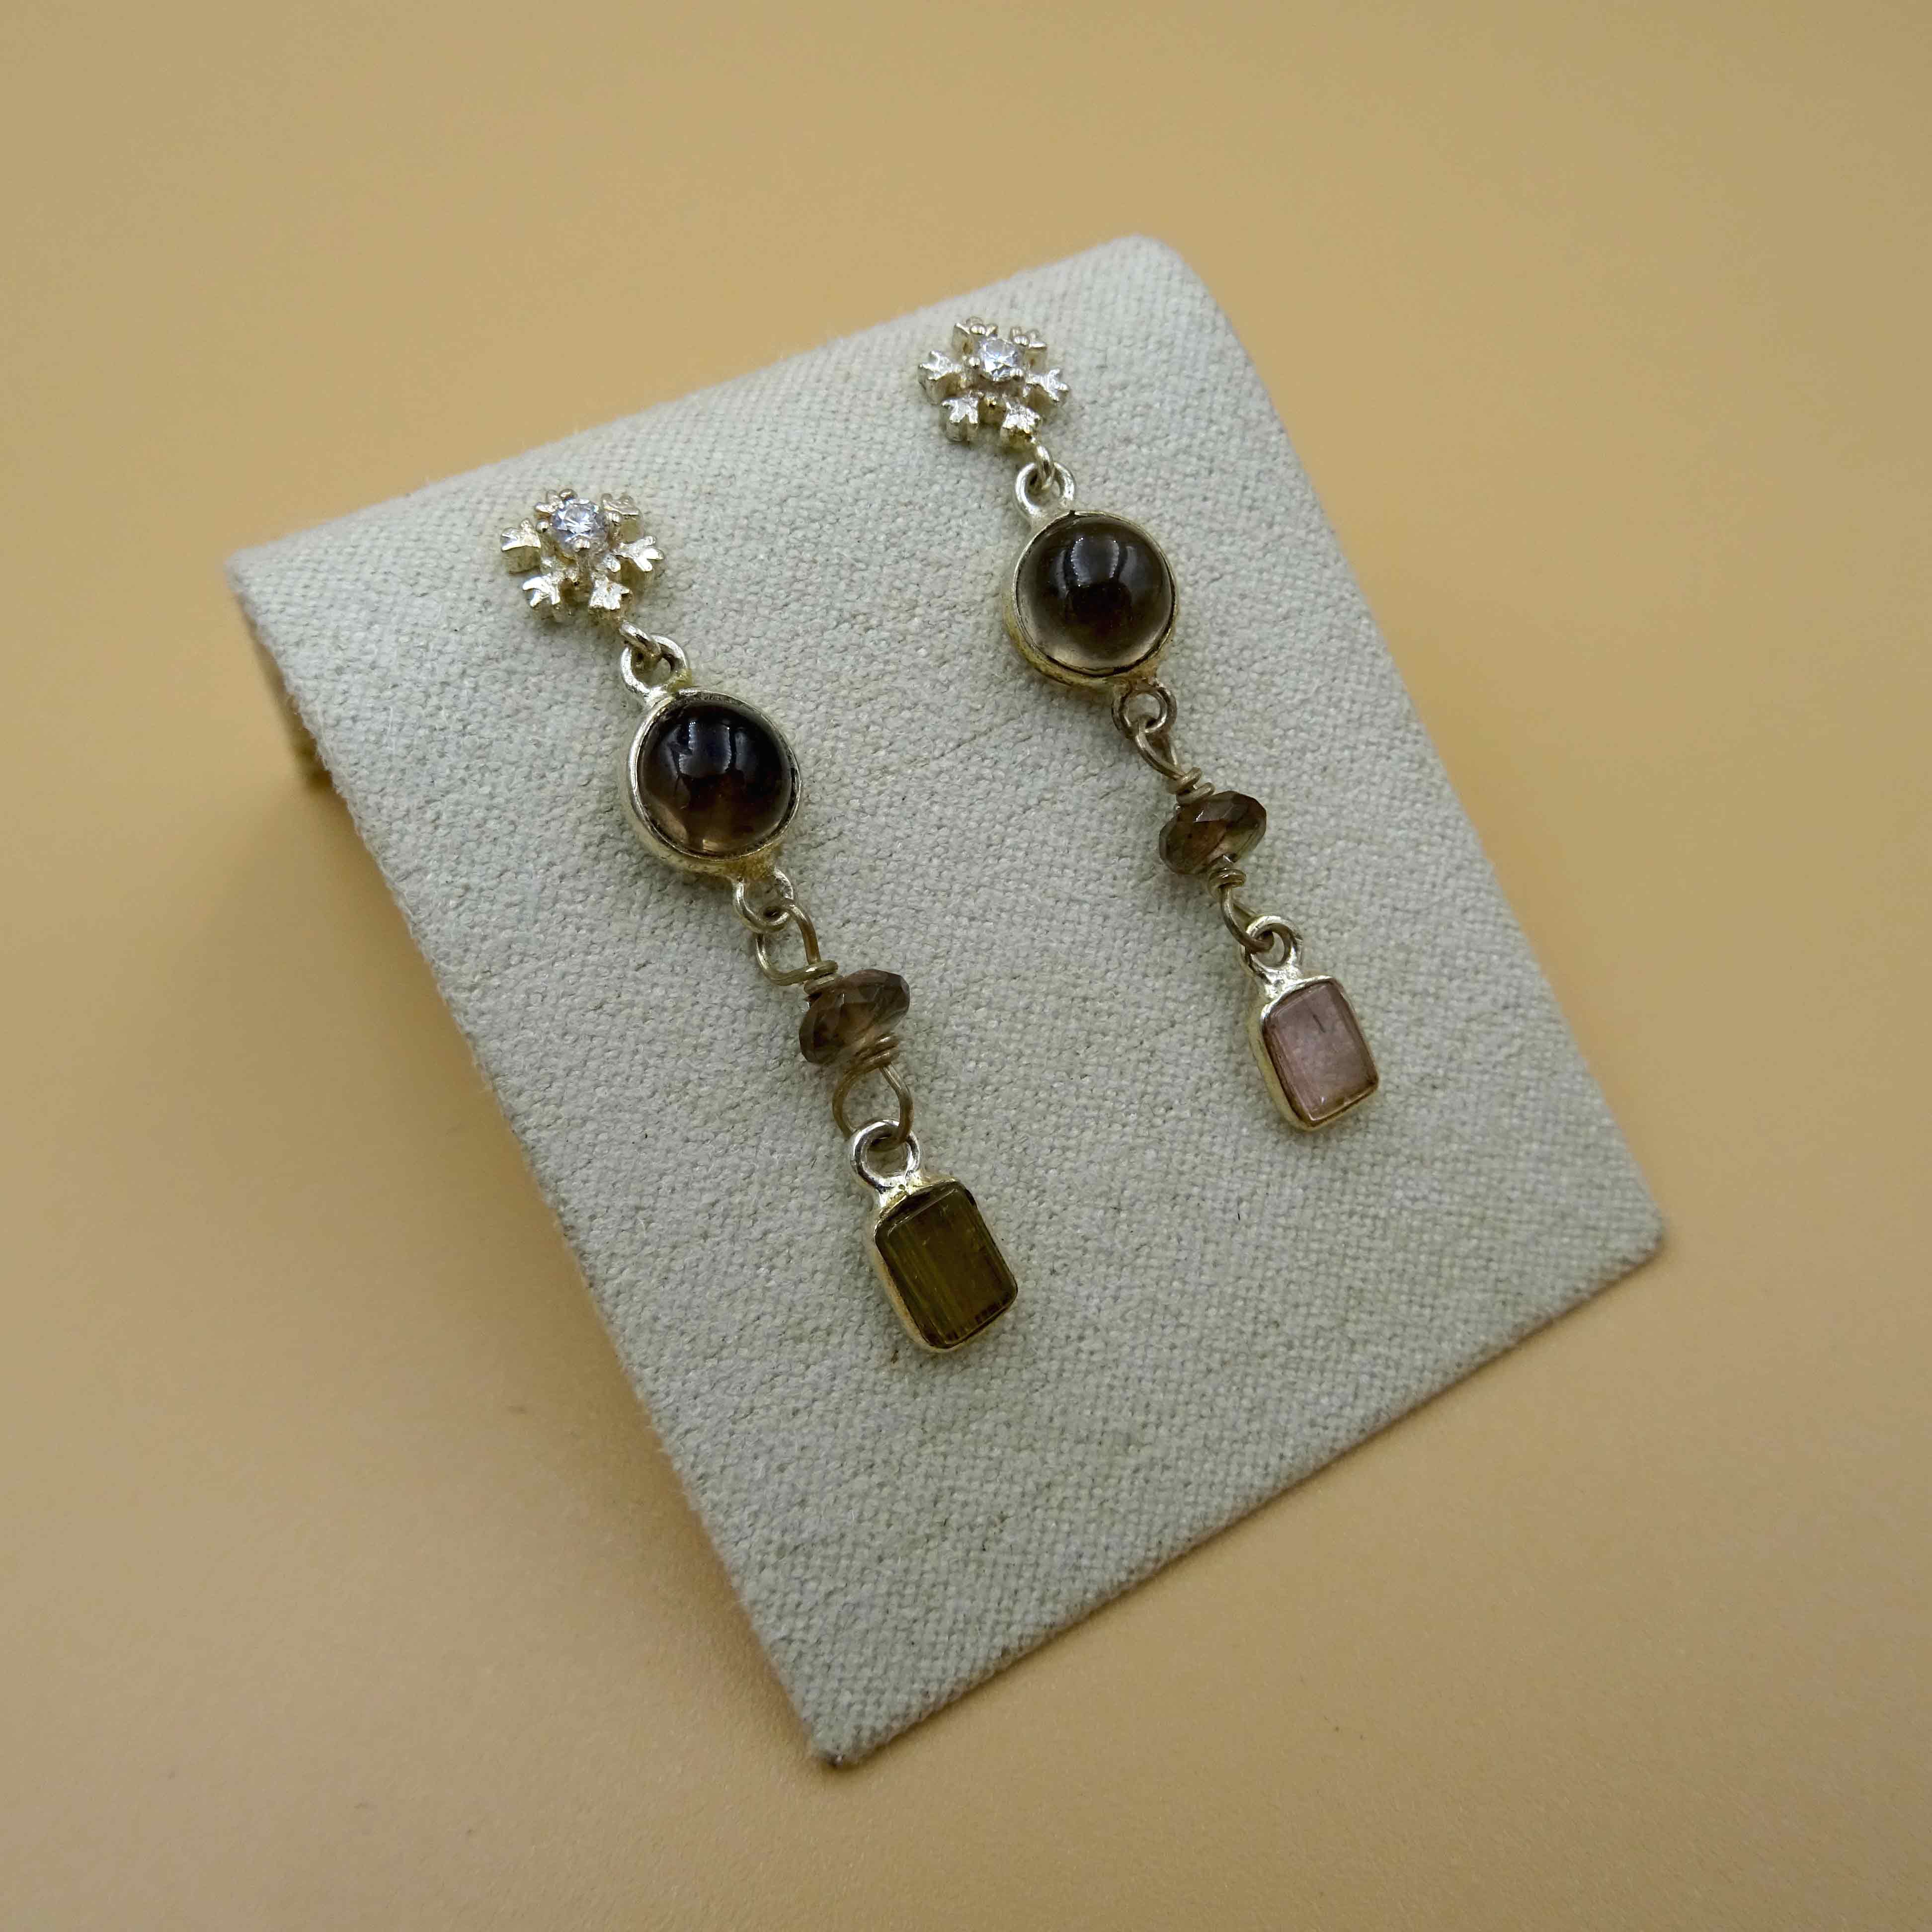 Snowflake Silver Earrings with Crystal, Smoky Quartz, and Tourmaline